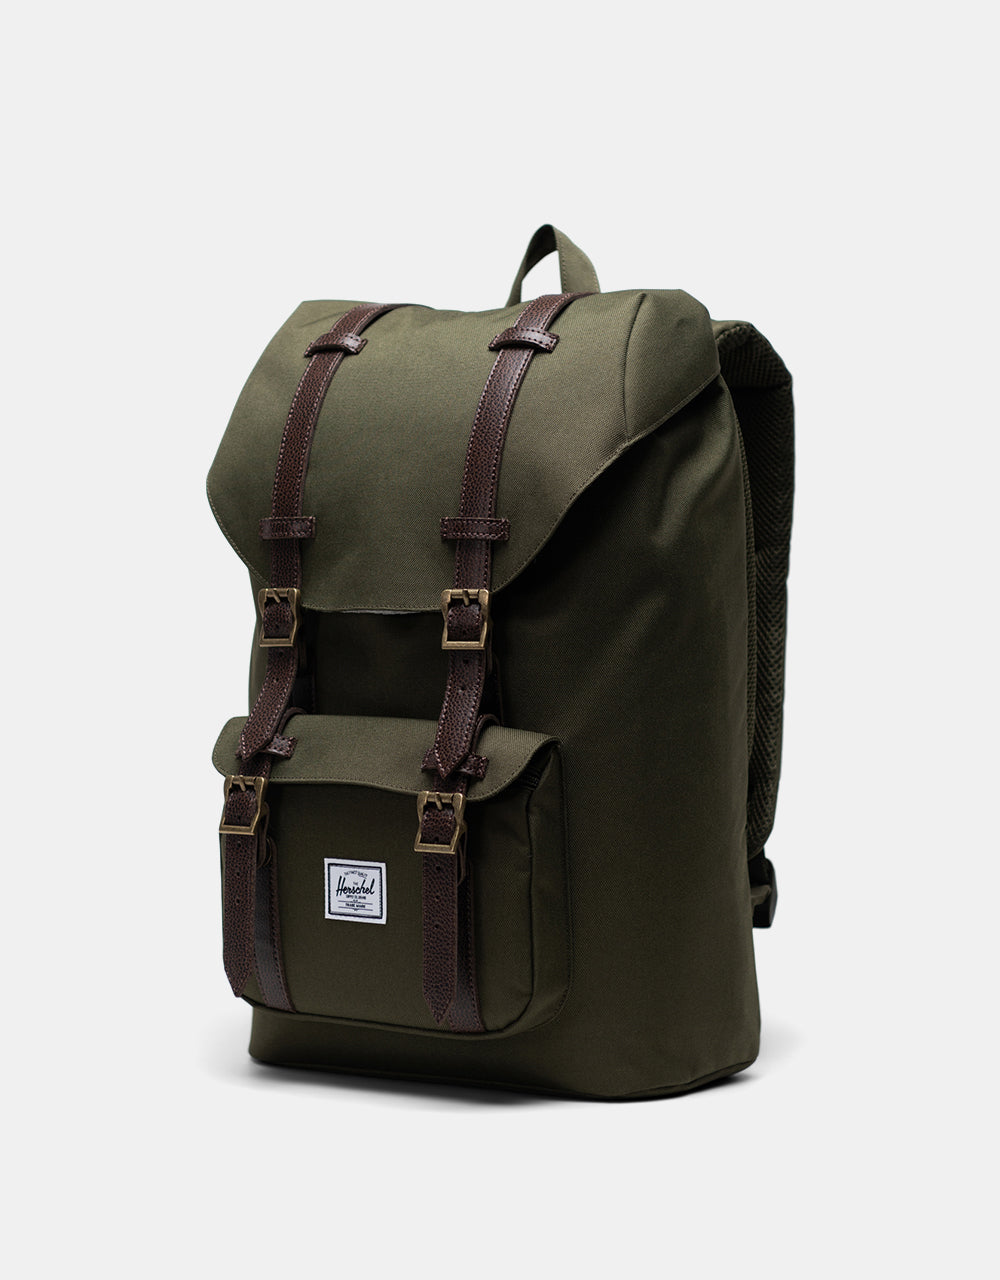 Herschel Supply Co. Retreat Backpack - Ivy Green/Chicory Coffee